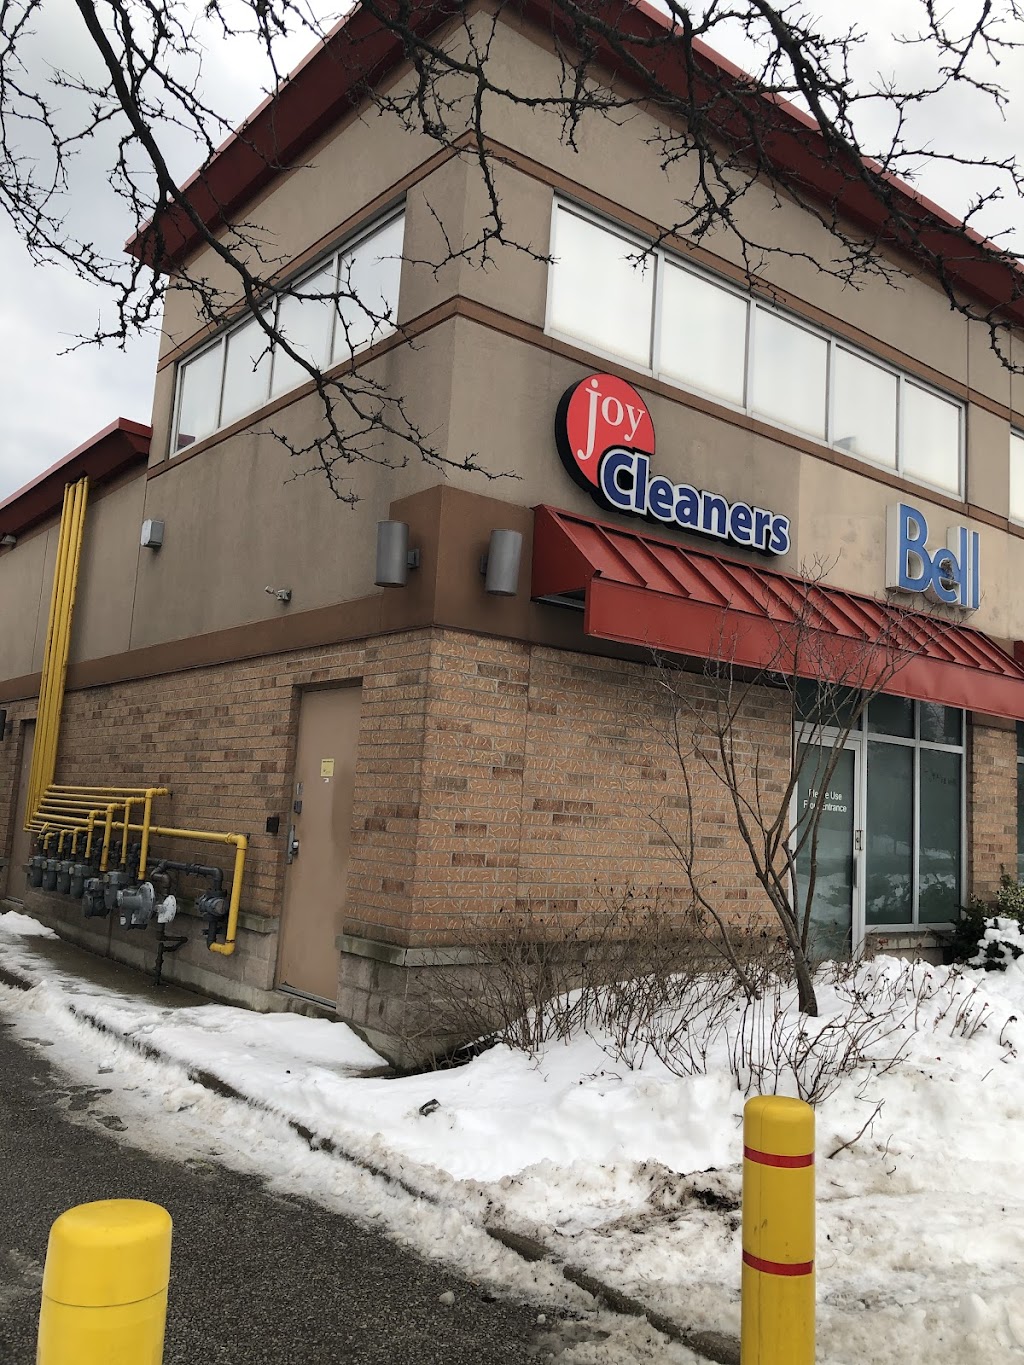 Joy Cleaners | laundry | 259 Morningside Ave, Scarborough, ON M1E 3E6, Canada | 4162845599 OR +1 416-284-5599